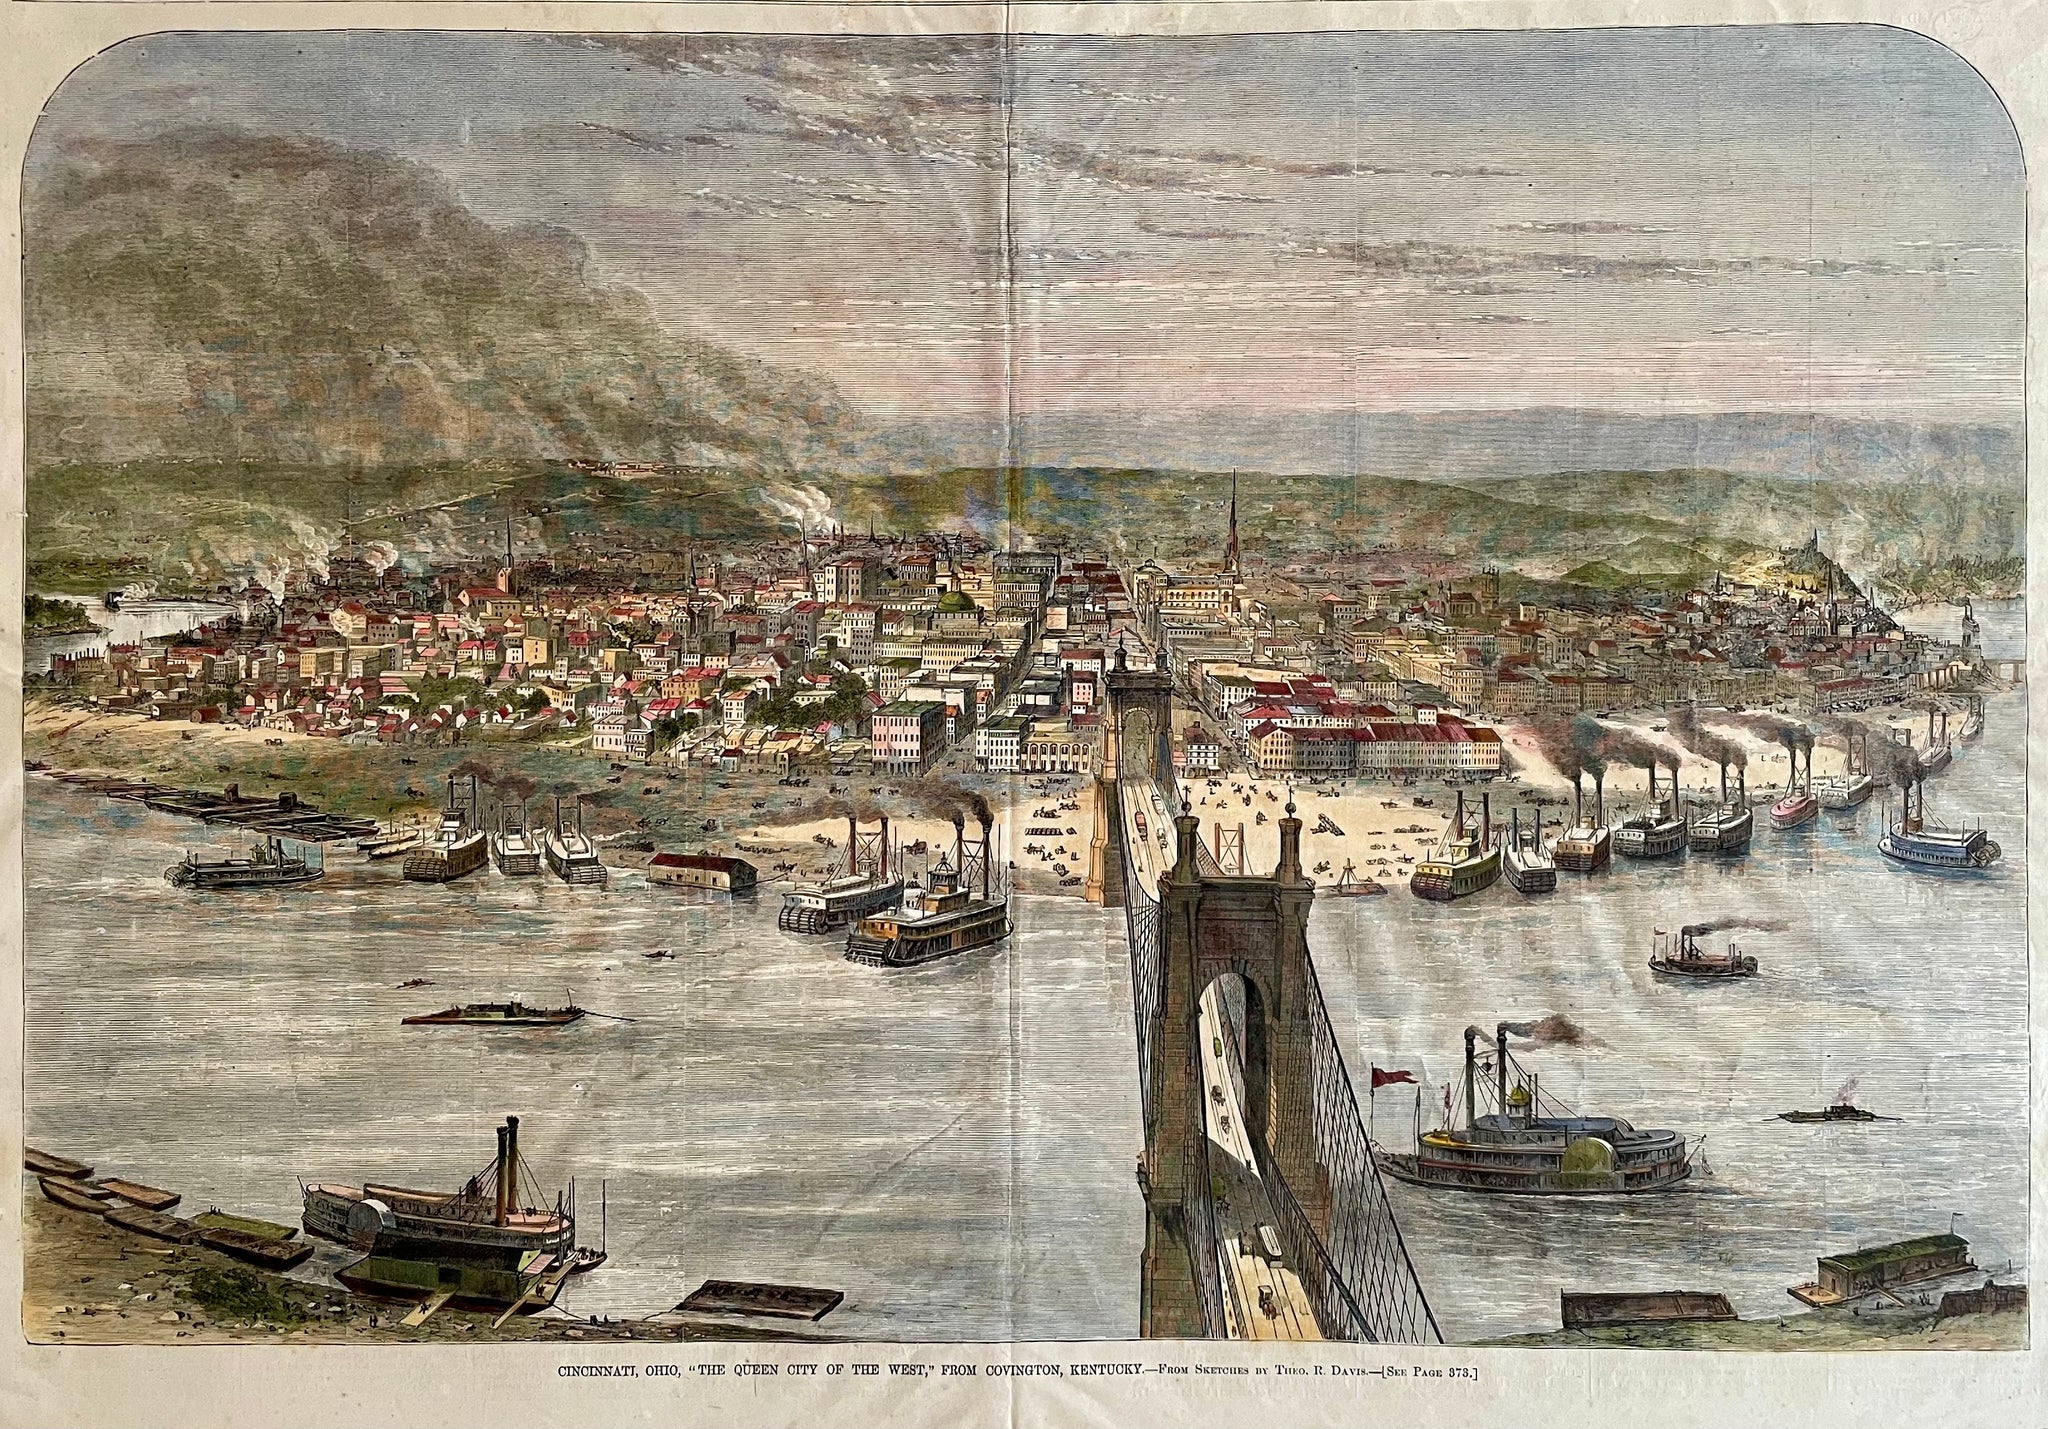 "Cincinnati, Ohio the 'Queen City of the West' from Covington, Kentucky"  Stunning general view of Cincinnati from across the Ohio River from an elevated point. Foreground: Roebling Suspension Bridge. Lively scenery on the river and a spectacular view of Cincinnati.  Very attractively hand colored wood engraving after a sketch by Theodore R. Davis (1840-1894)